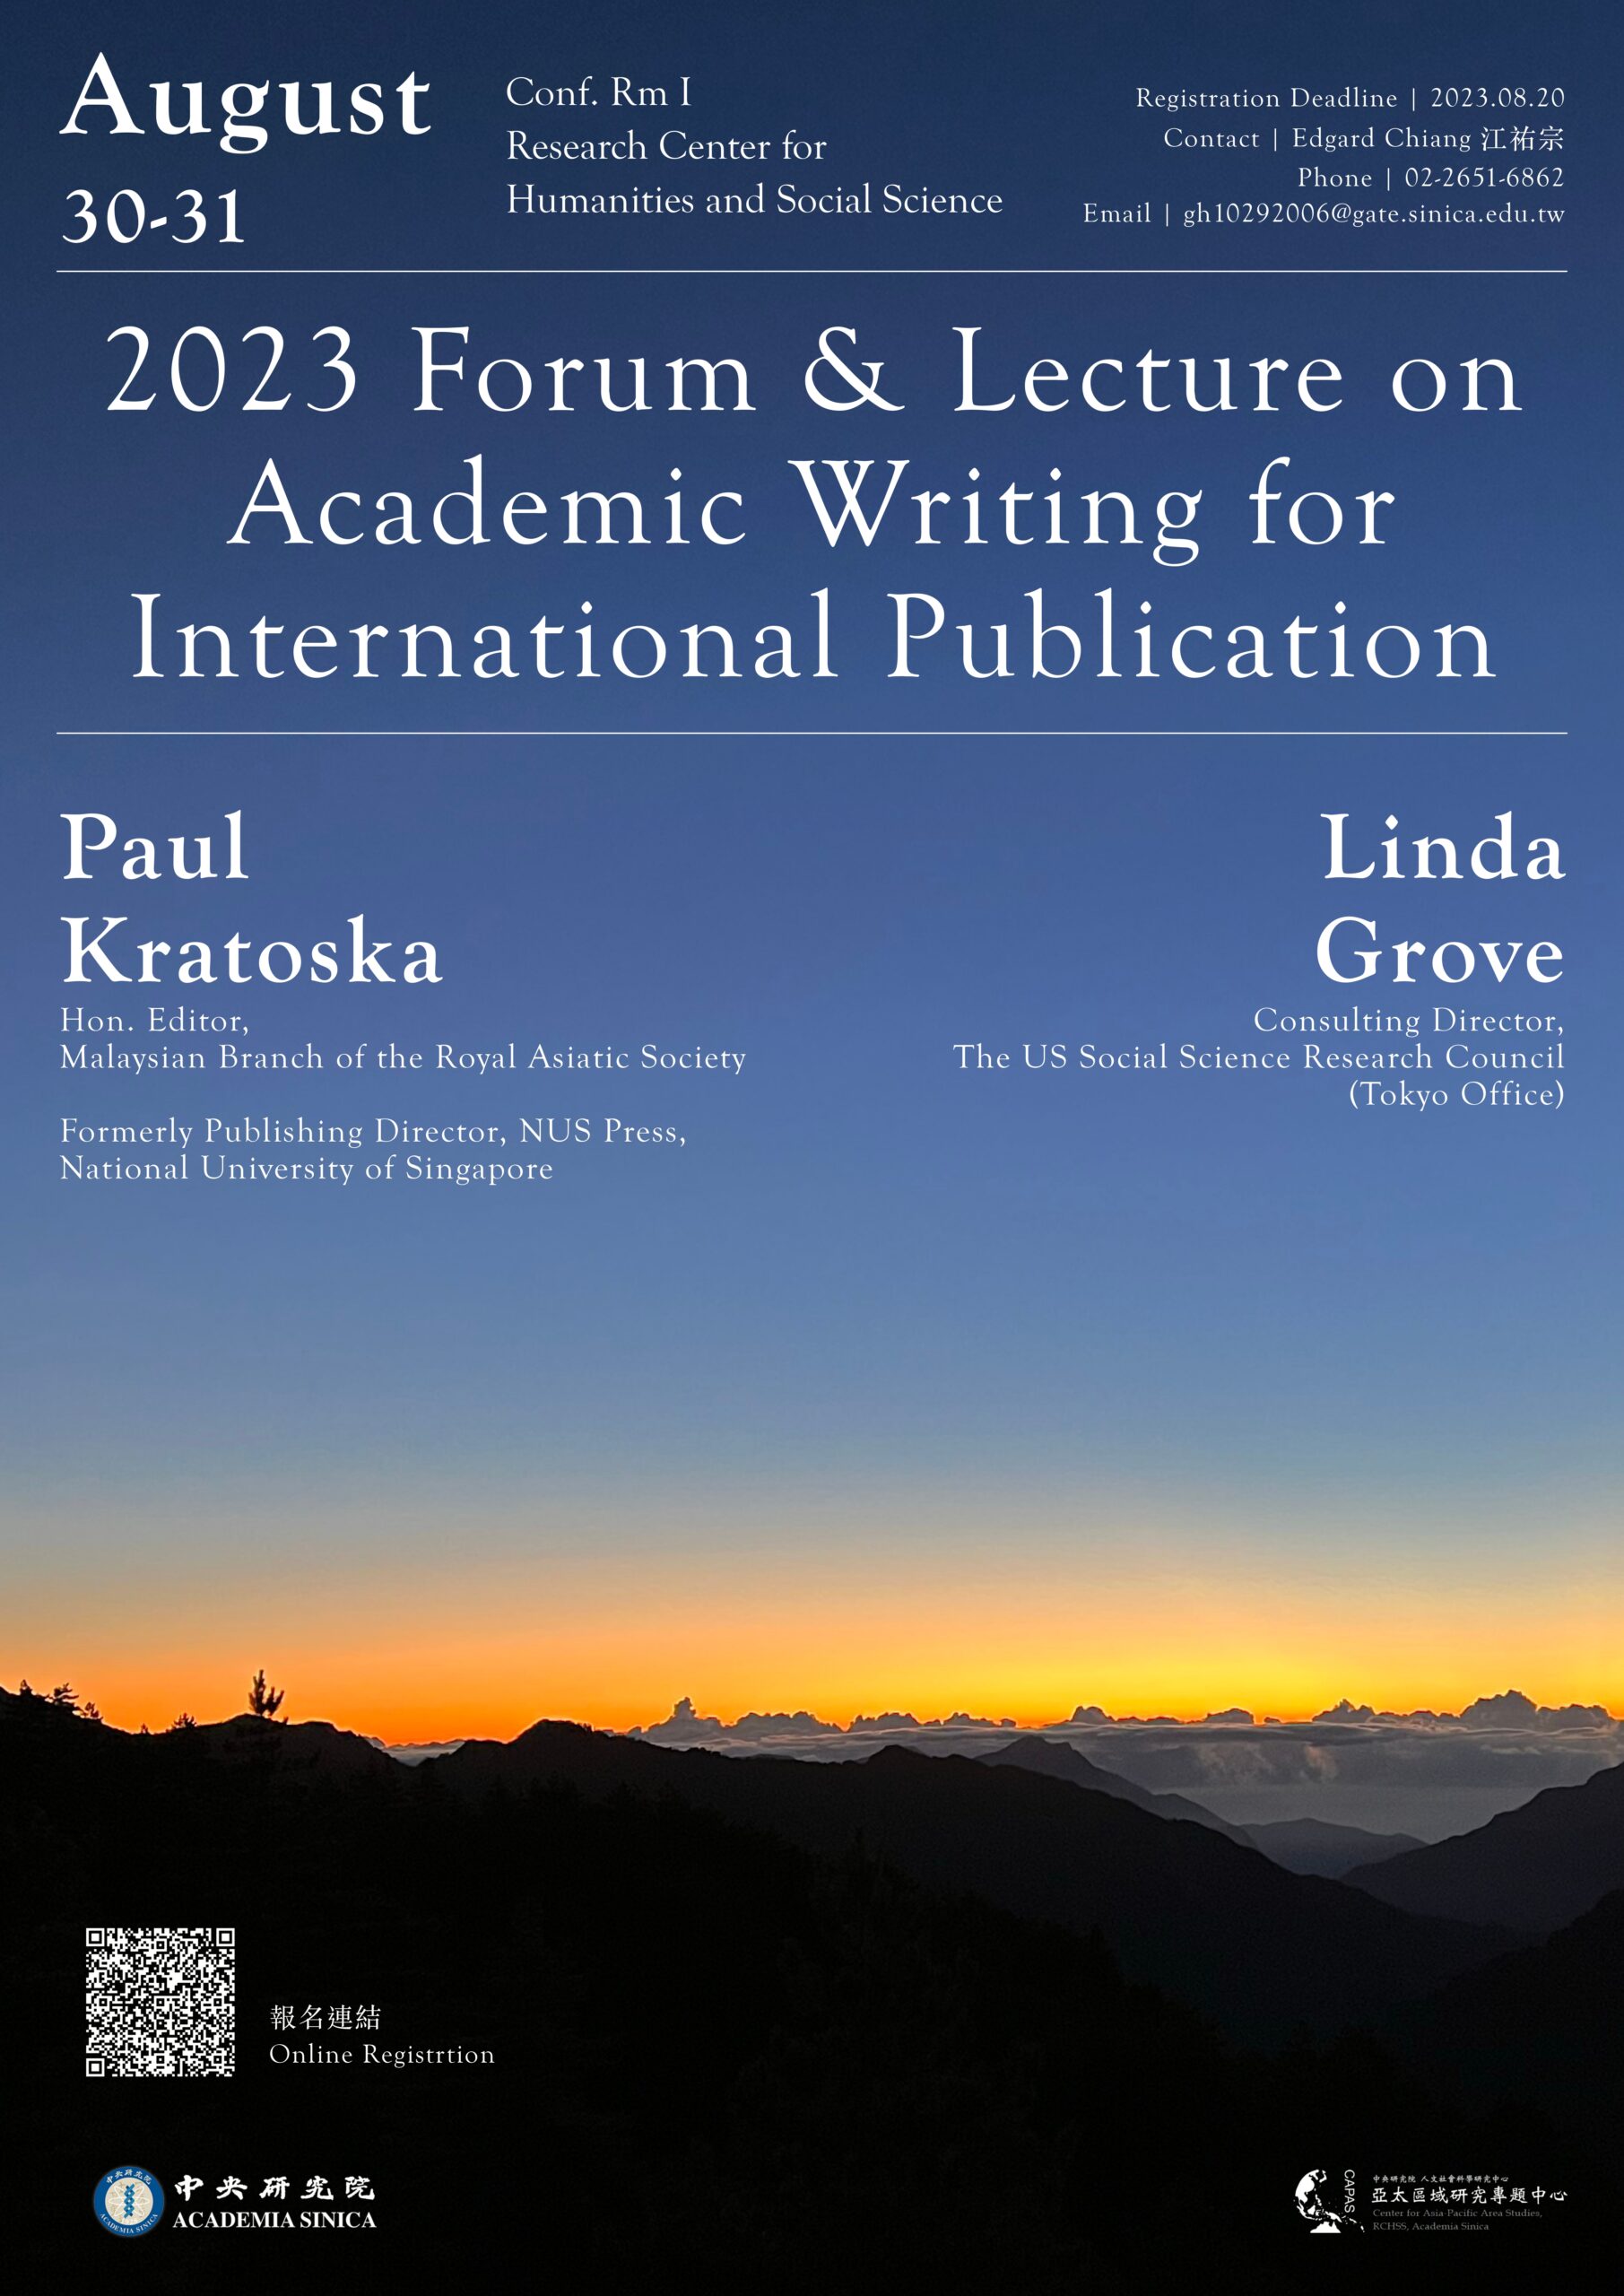 2023 Forum and Lecture on Academic Writing for International Publication